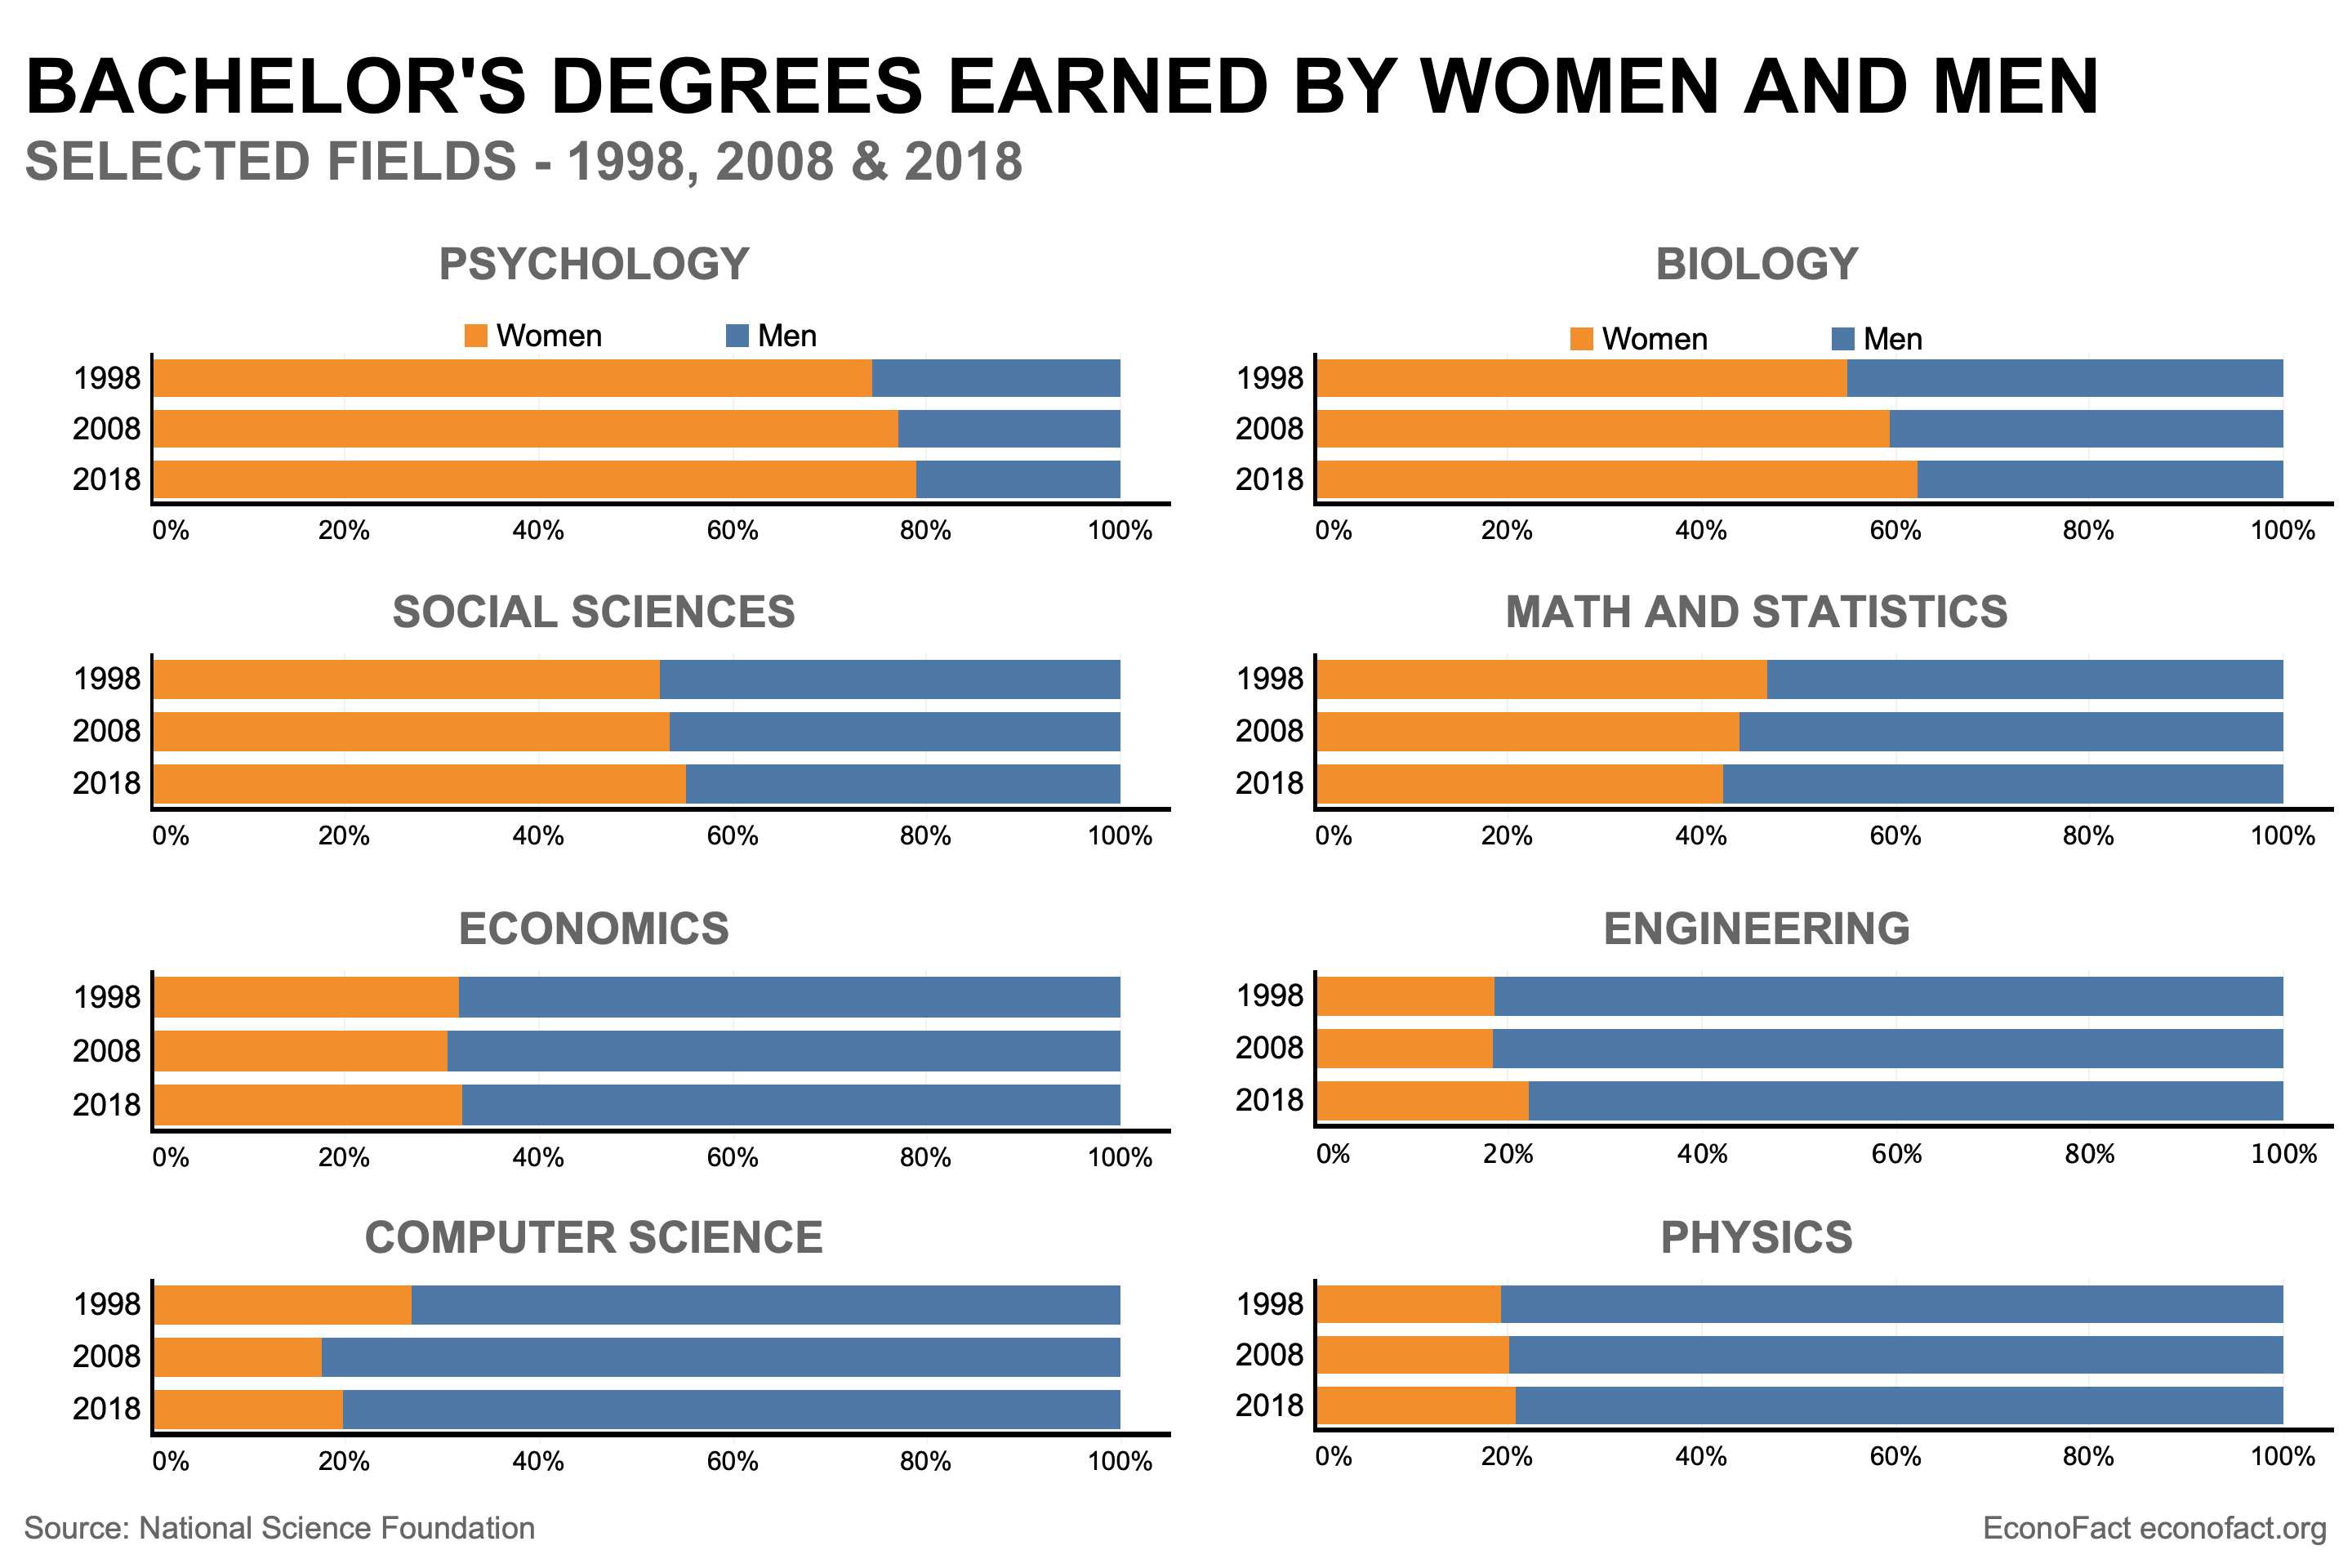 Graph of bachelor's degrees earned by women and men in 1998, 2008 and 2018. Despite the increase in women entering college in recent decades, their share in core STEM fields has hardly increased